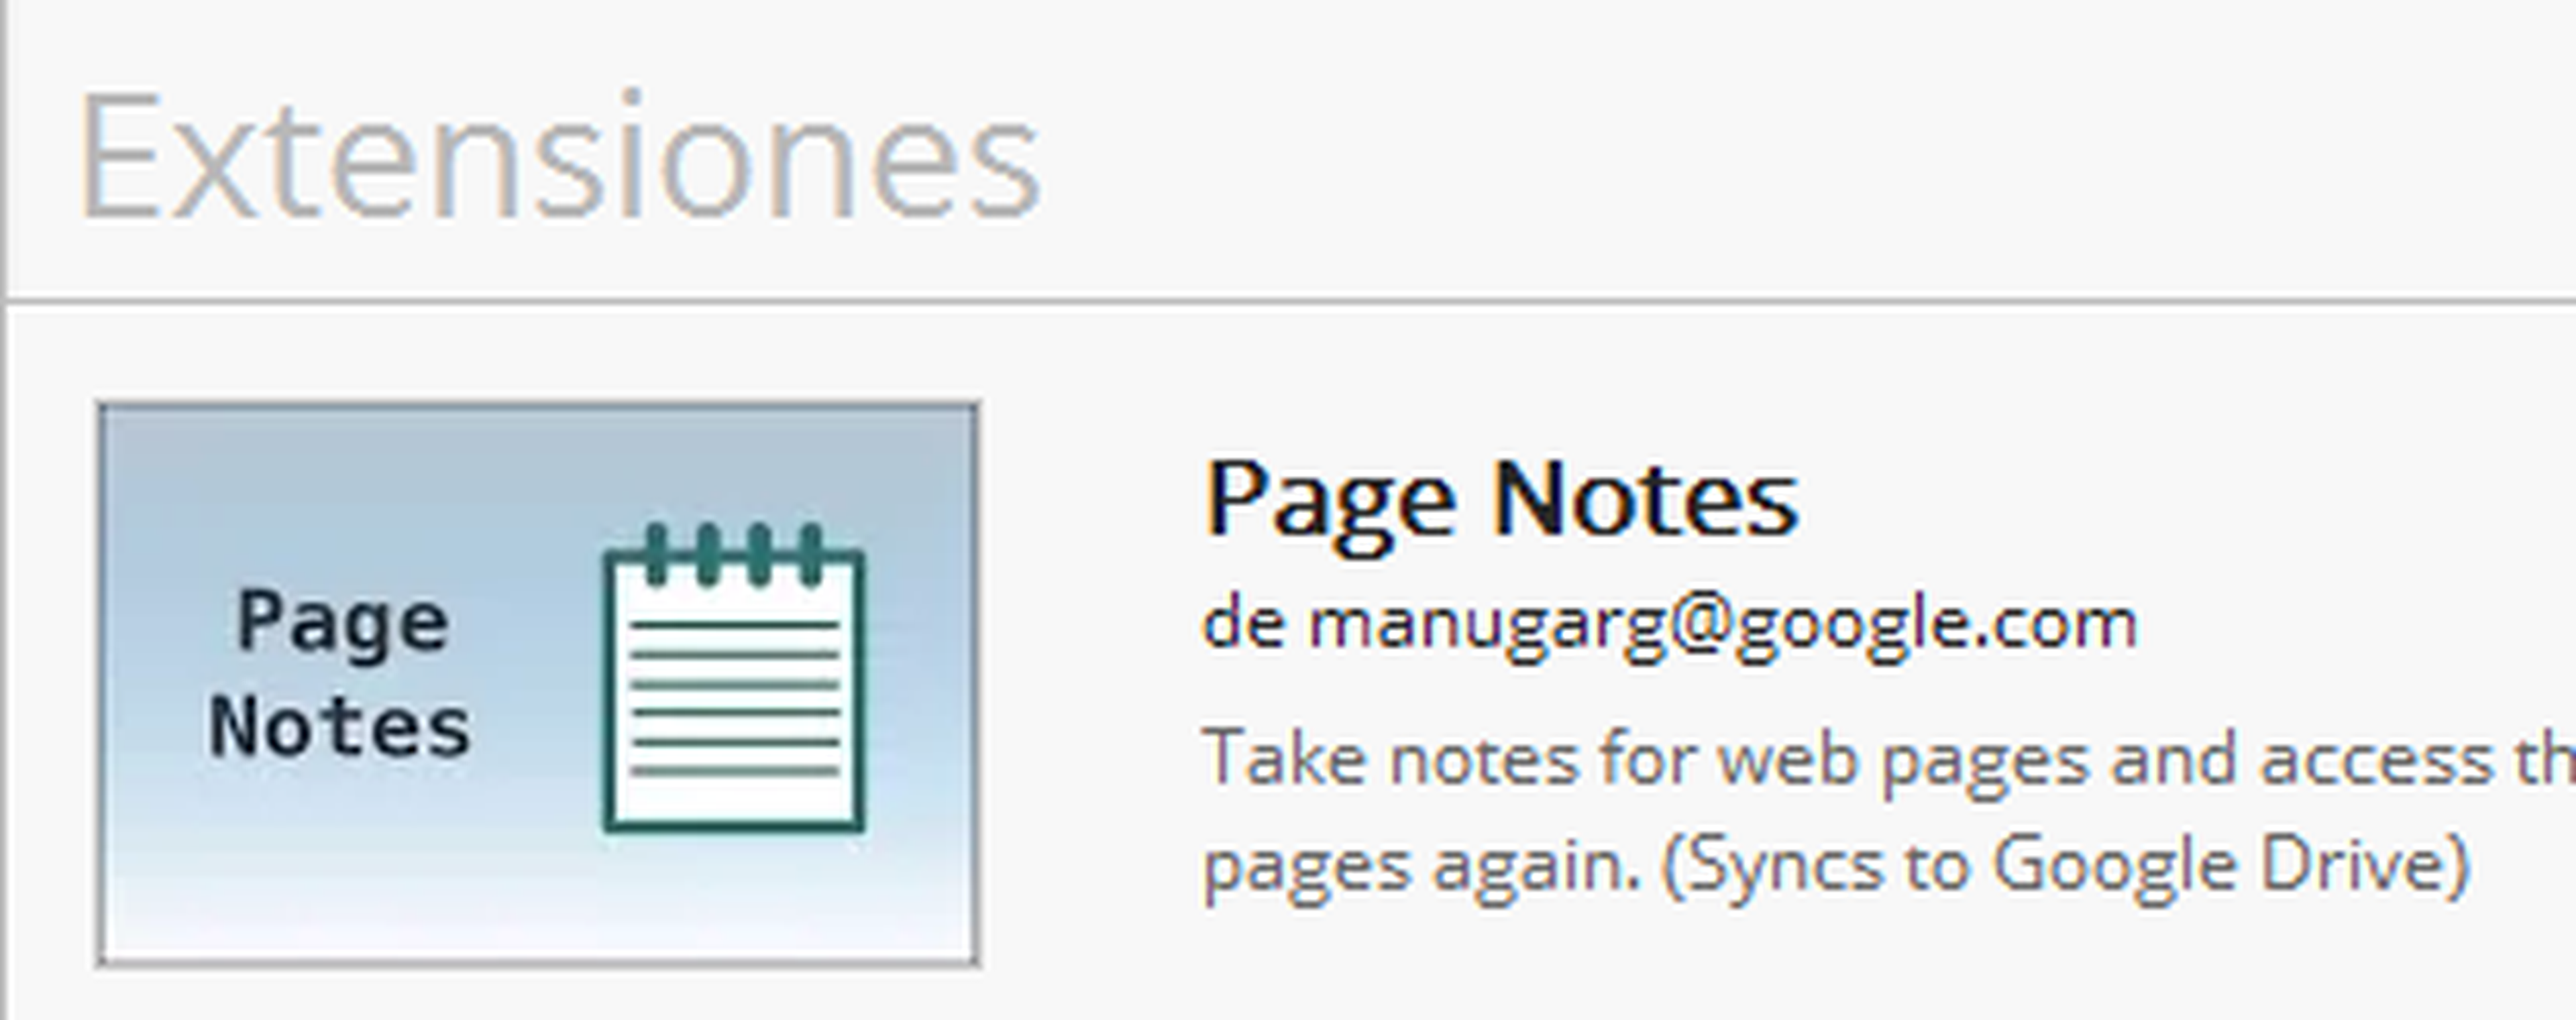 Page Notes